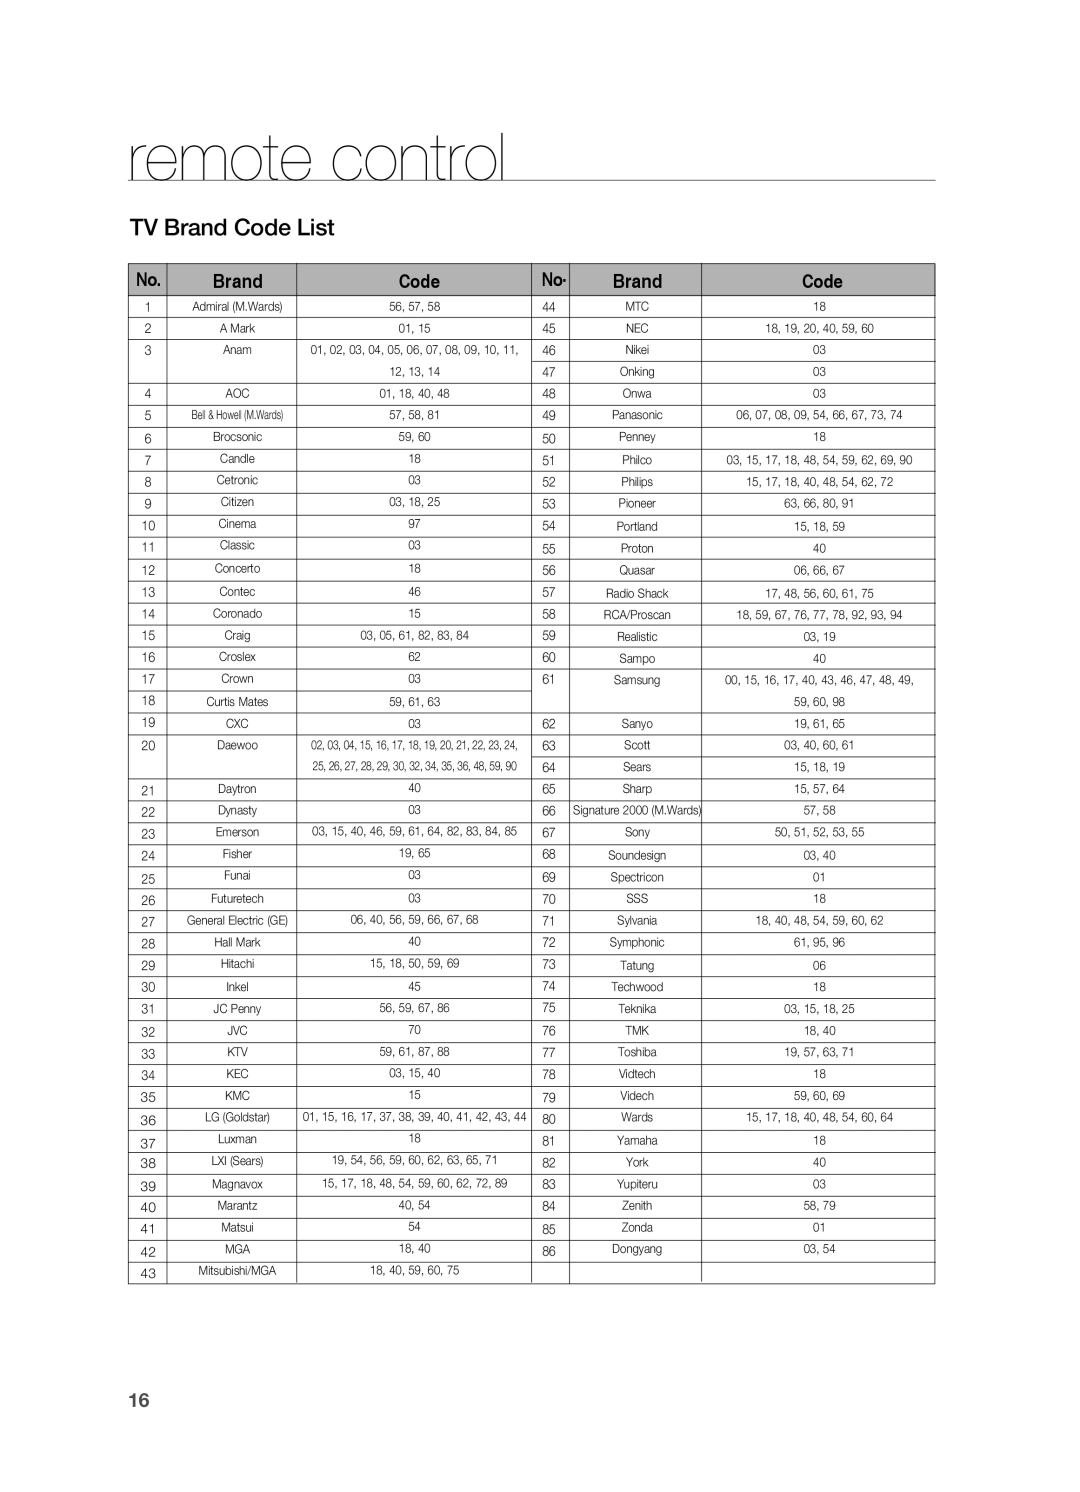 Sony HT-X810 user manual TV Brand Code List, remote control 